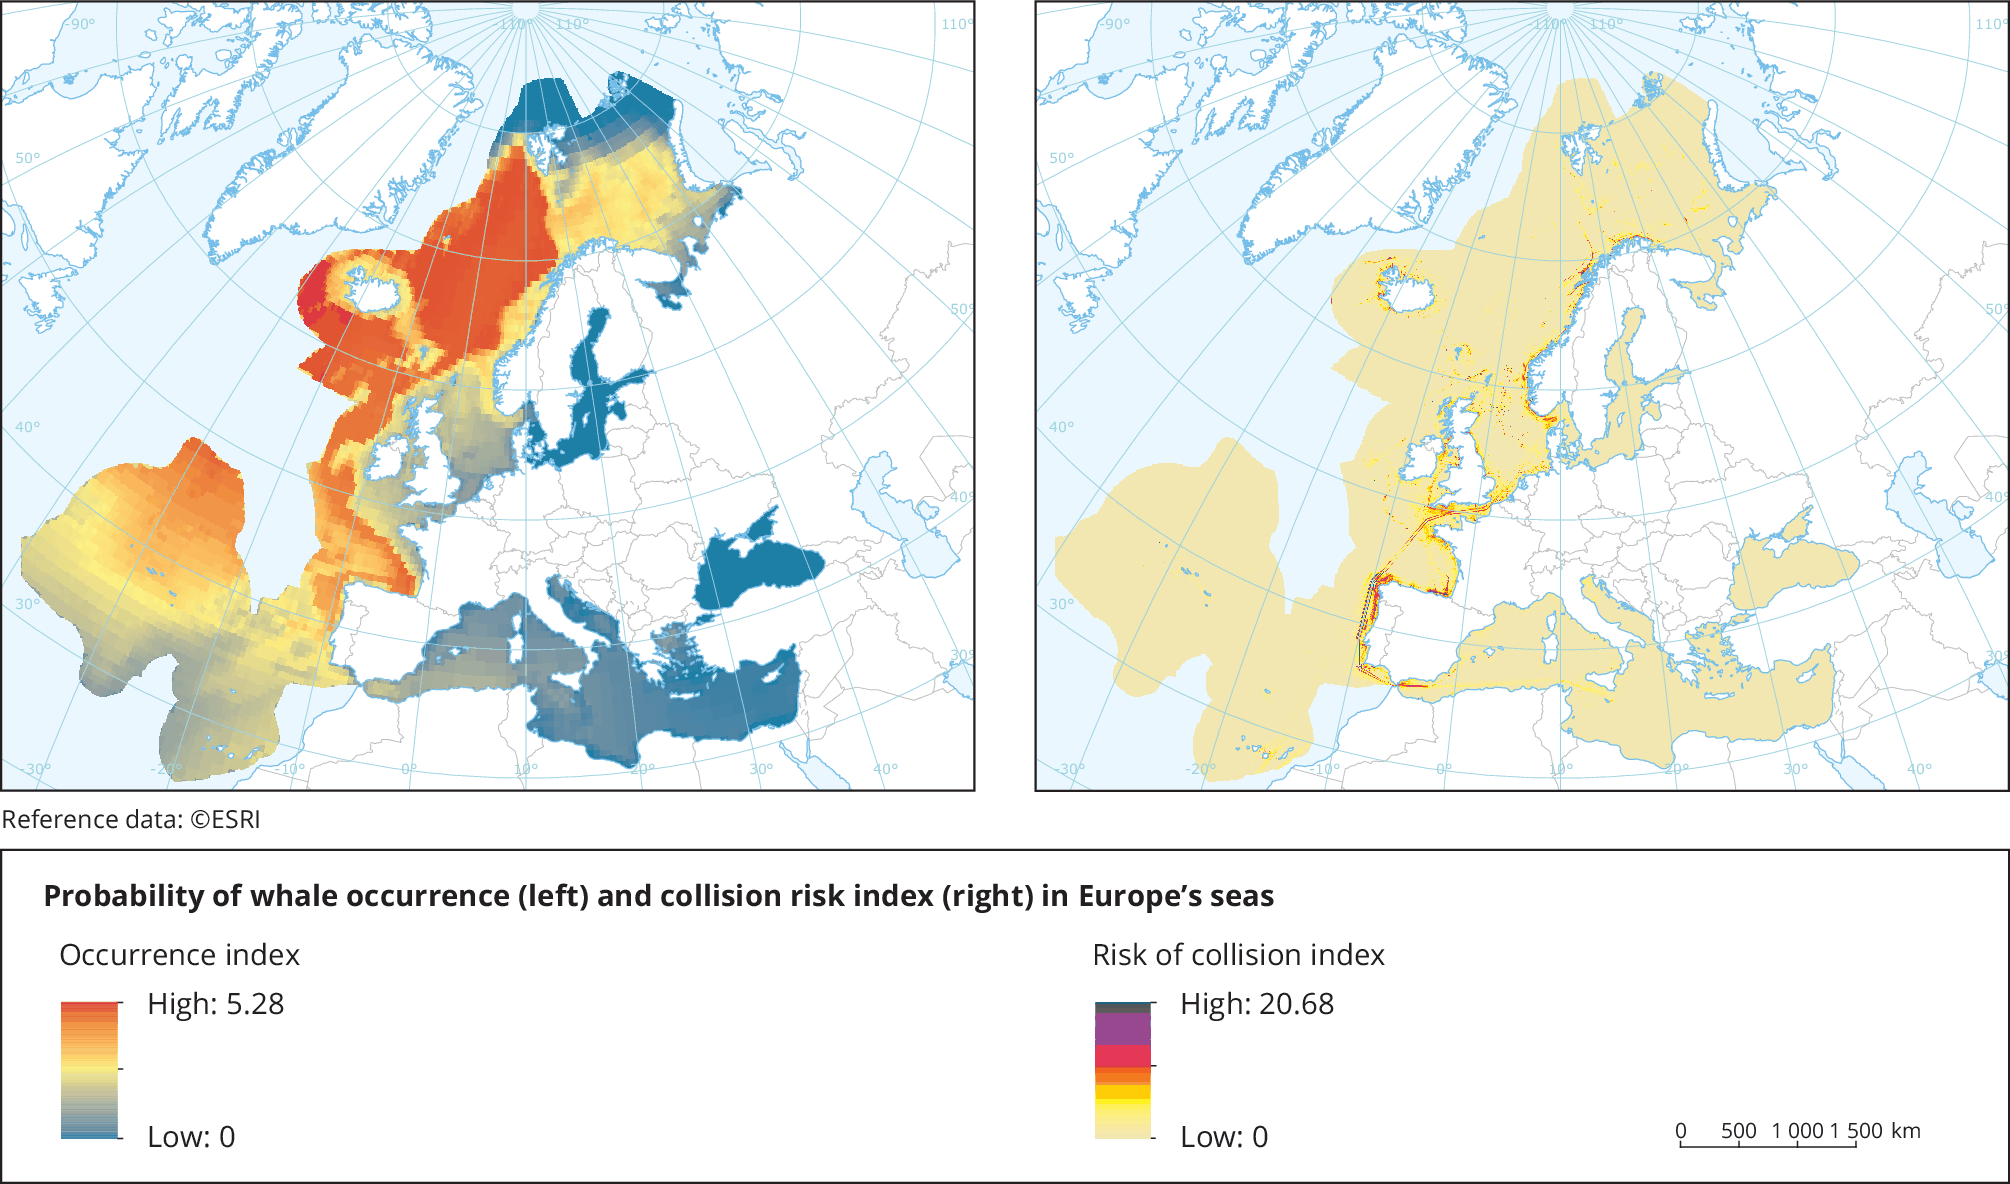 https://www.eea.europa.eu/data-and-maps/figures/probability-of-whale-occurrence-and/probability-of-whale-occurrence-and/MAP4.8-128668-Probability-of-whale_v6.eps.75dpi.gif/download